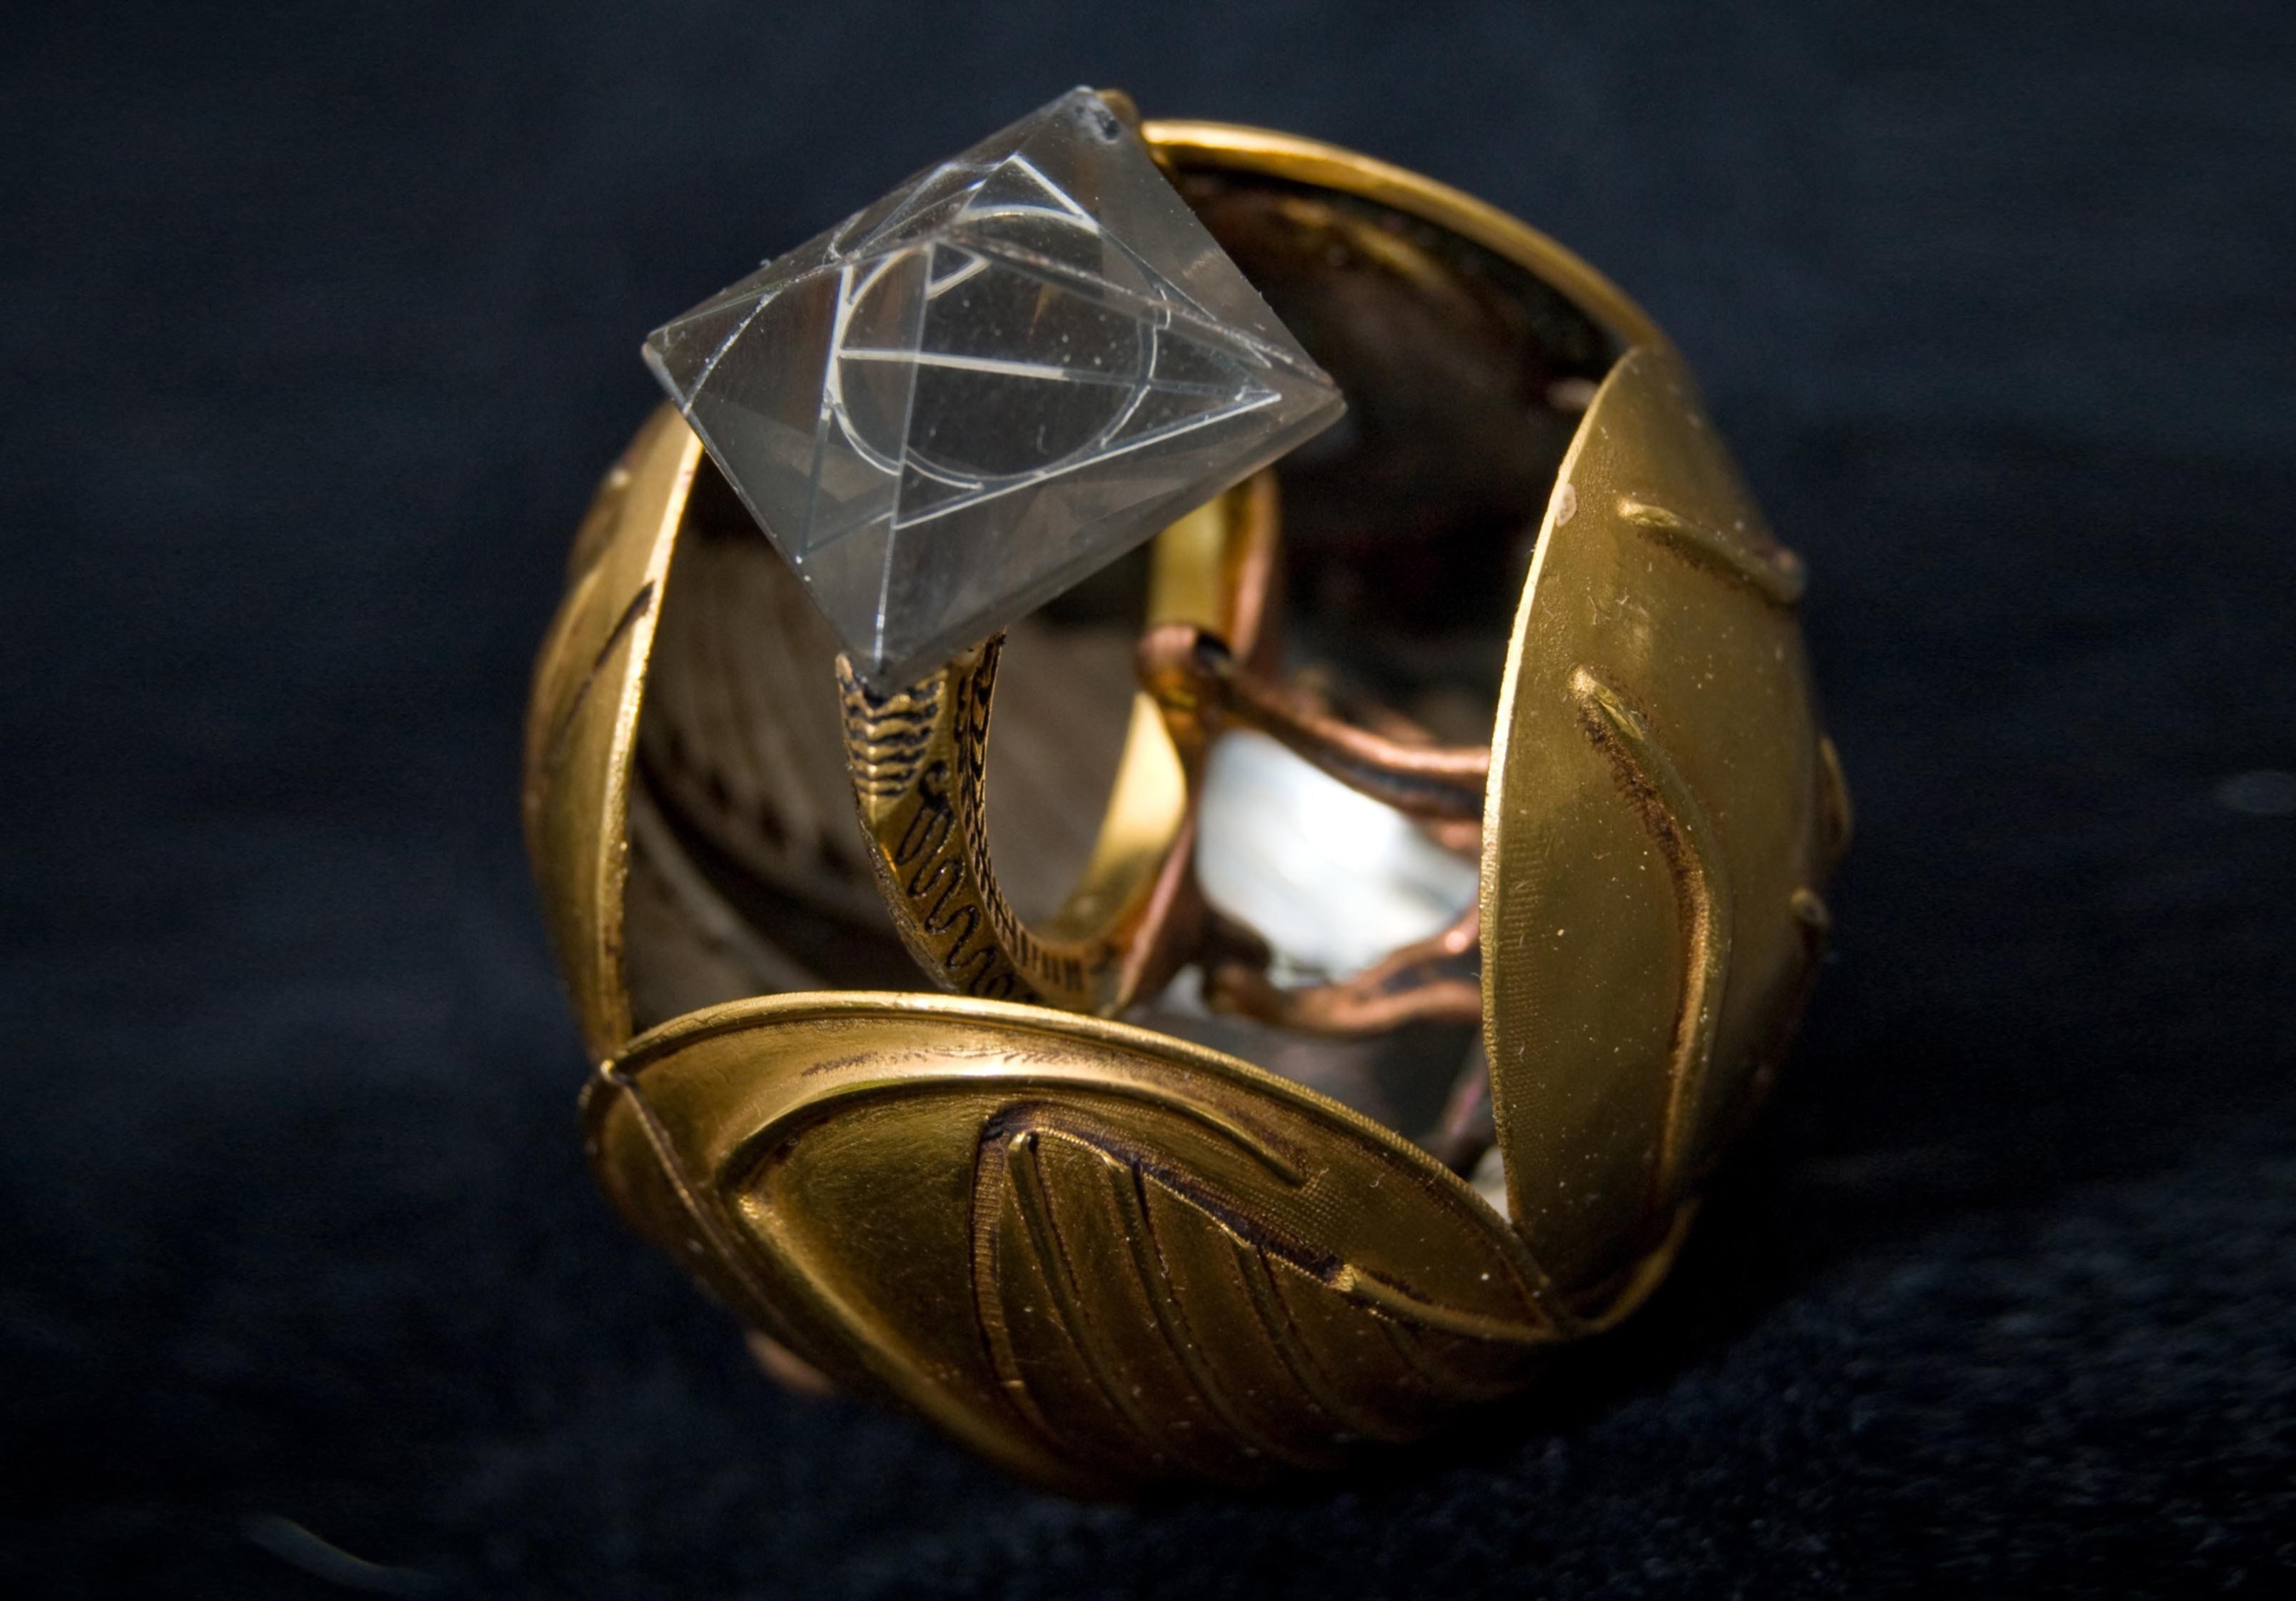 Harry Potter and the Deathly Hallows Golden Snitch